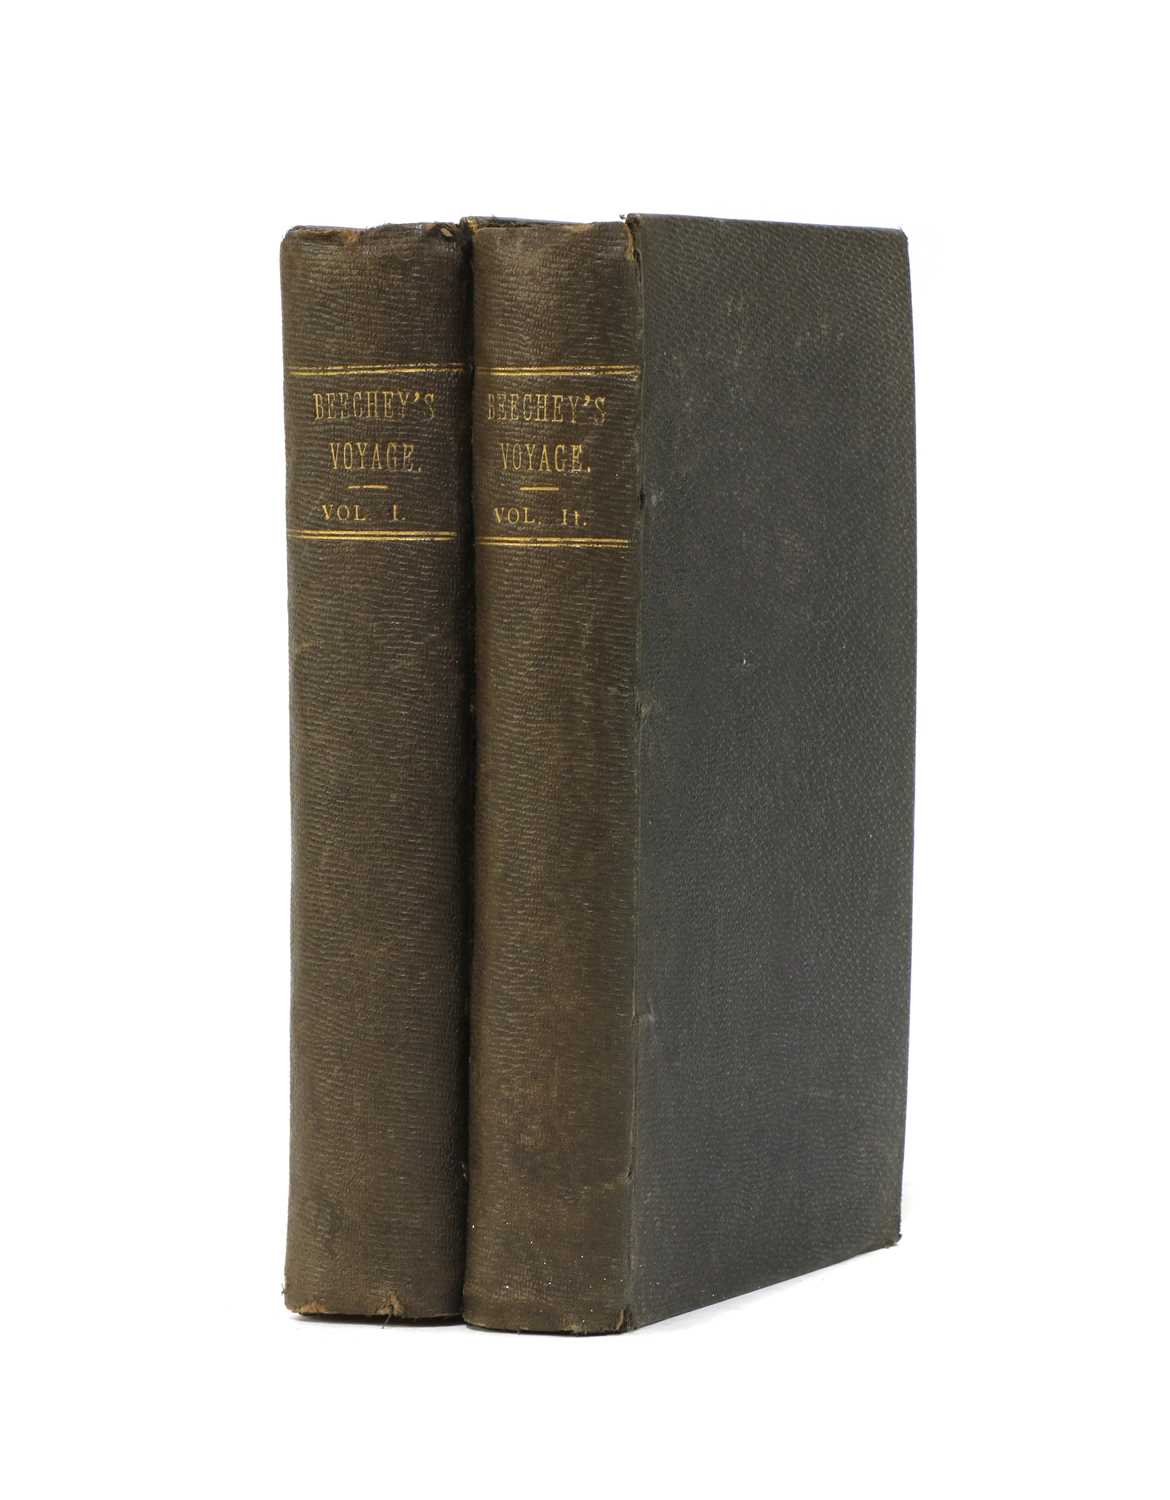 Lot 113 - BEECHEY, Frederick William: Narrative of a Voyage to the Pacific and Beering's Strait